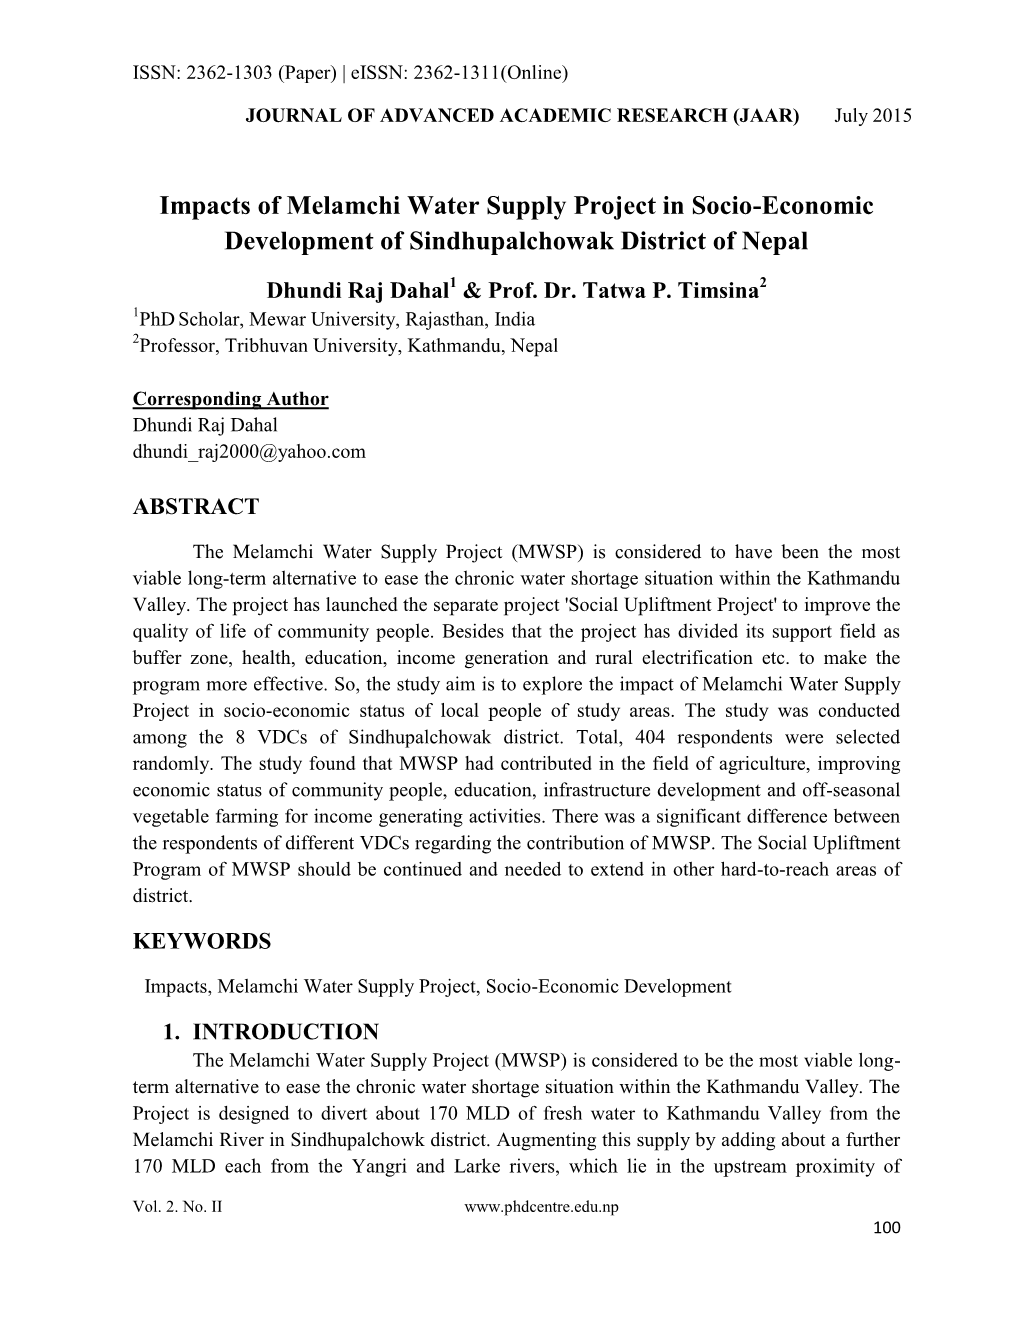 Impacts of Melamchi Water Supply Project in Socio-Economic Development of Sindhupalchowak District of Nepal